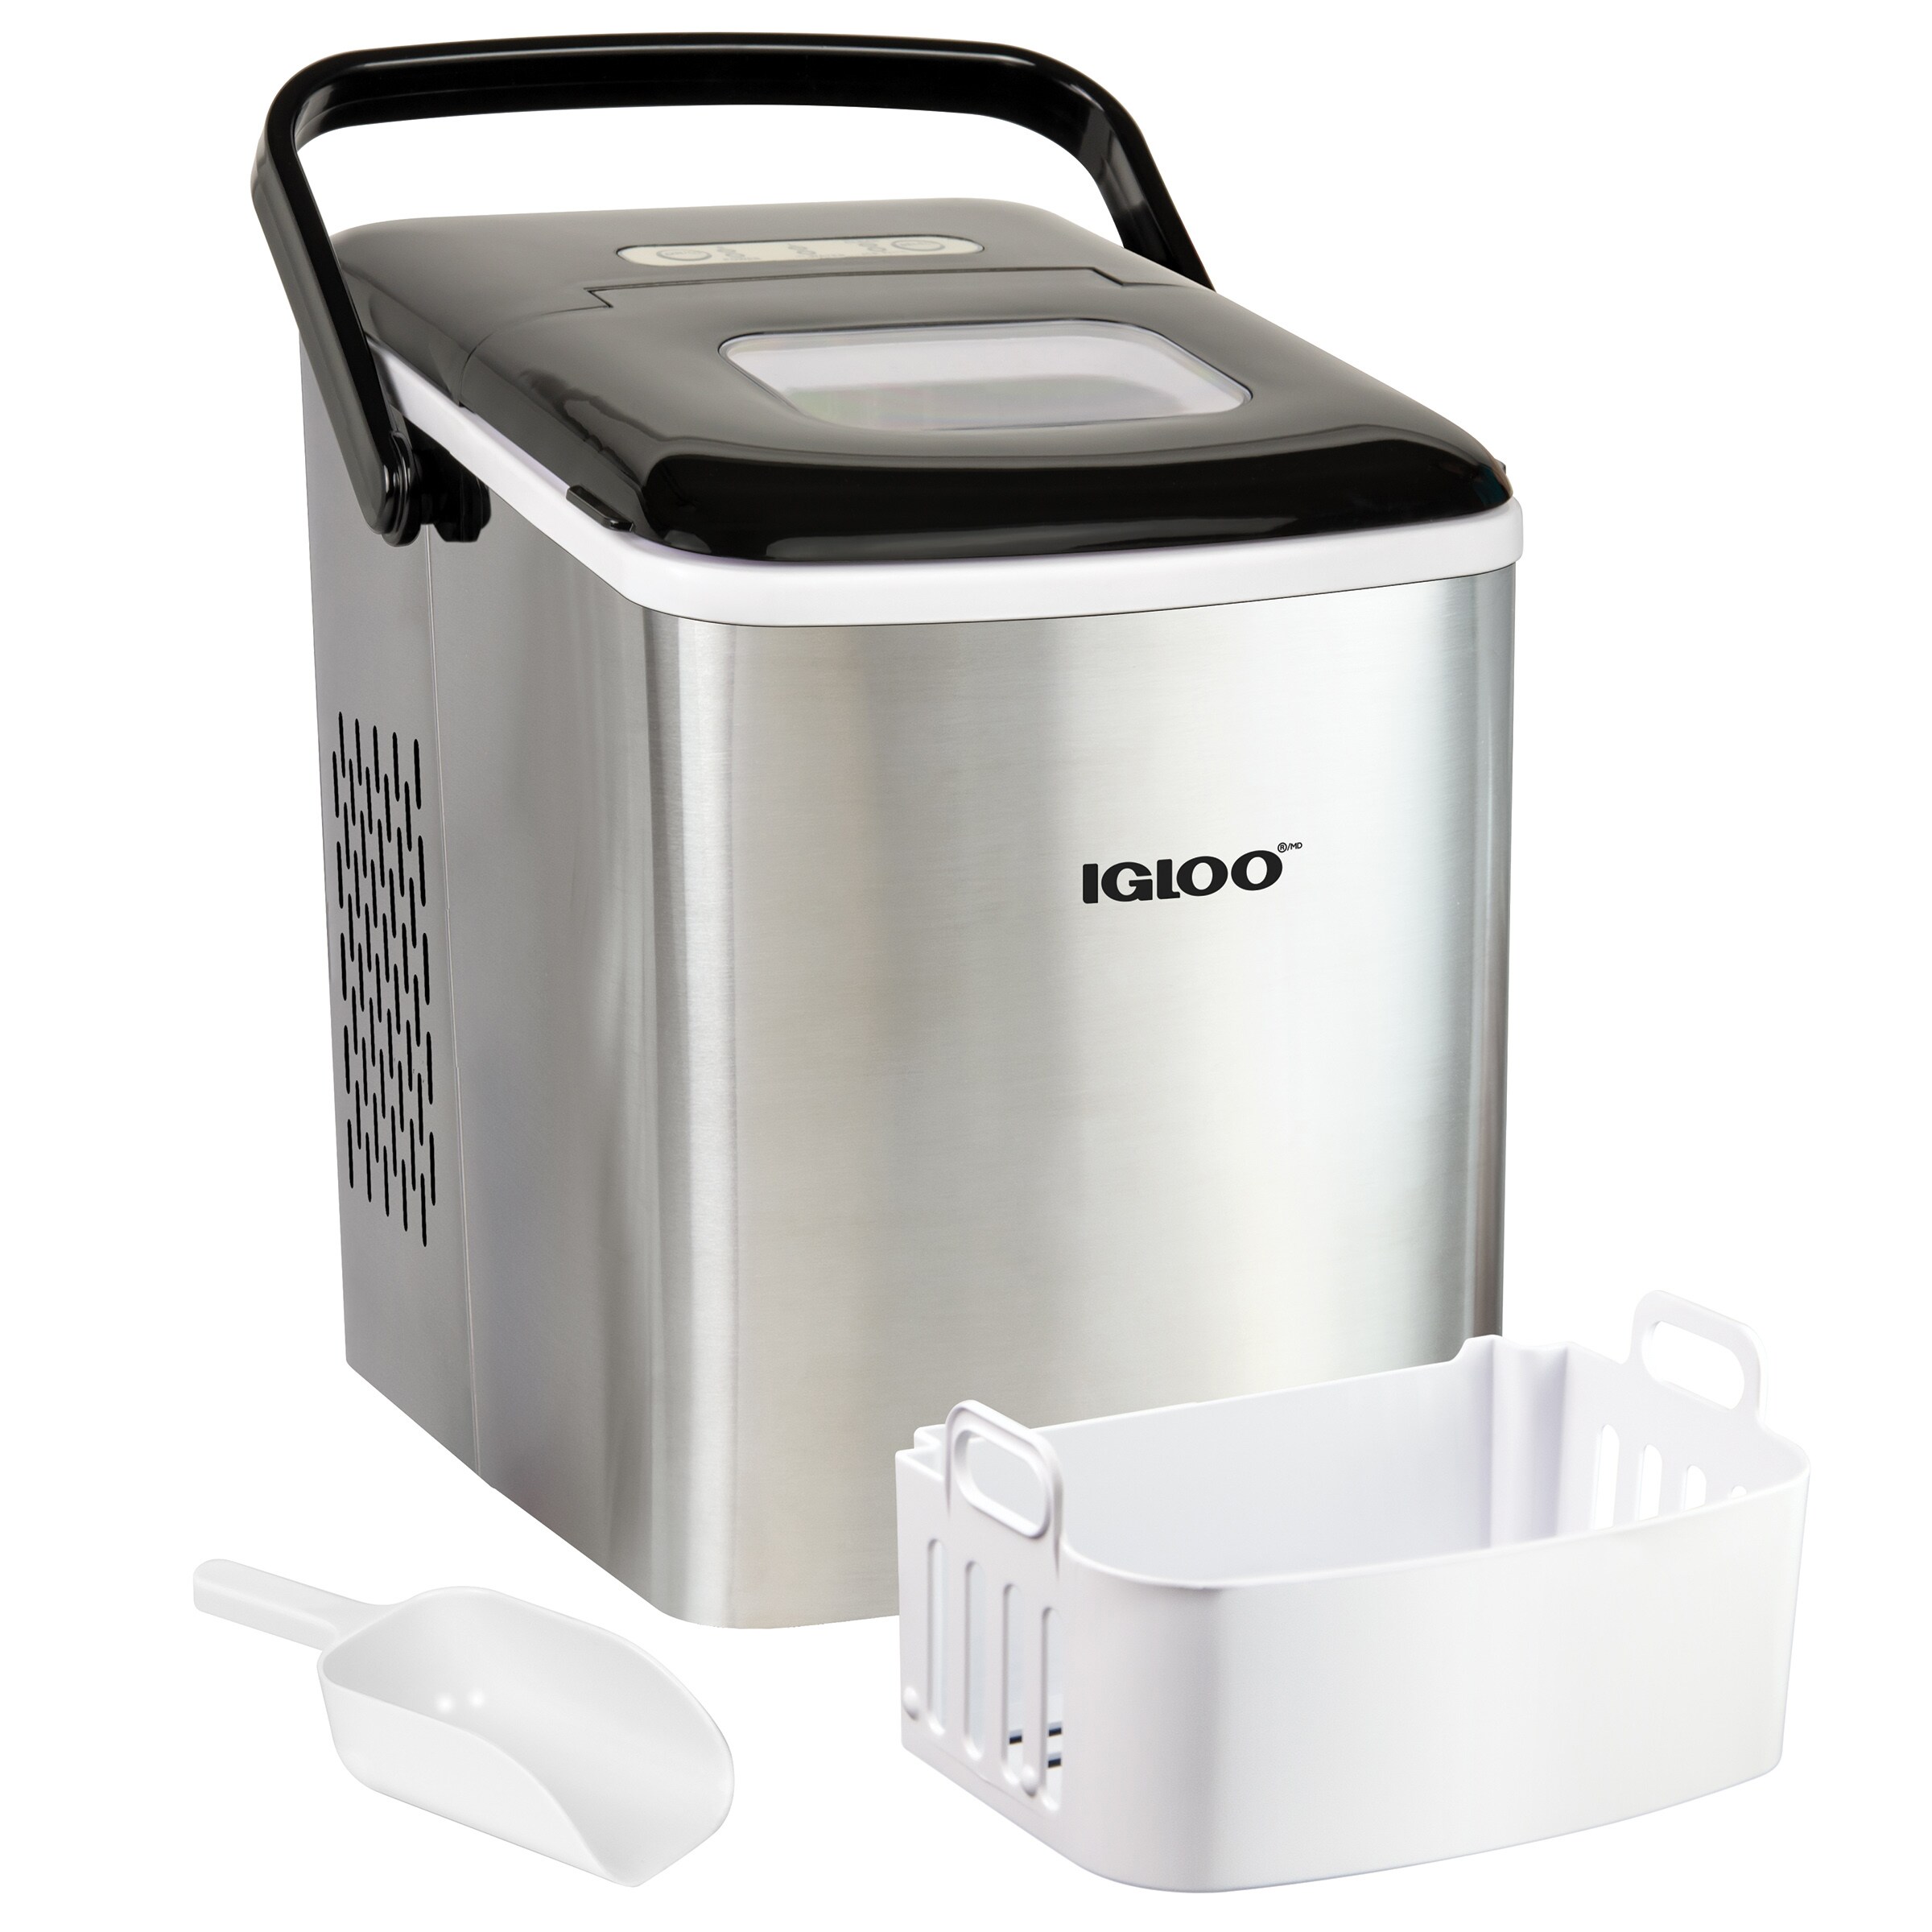 Igloo Ice Makers at